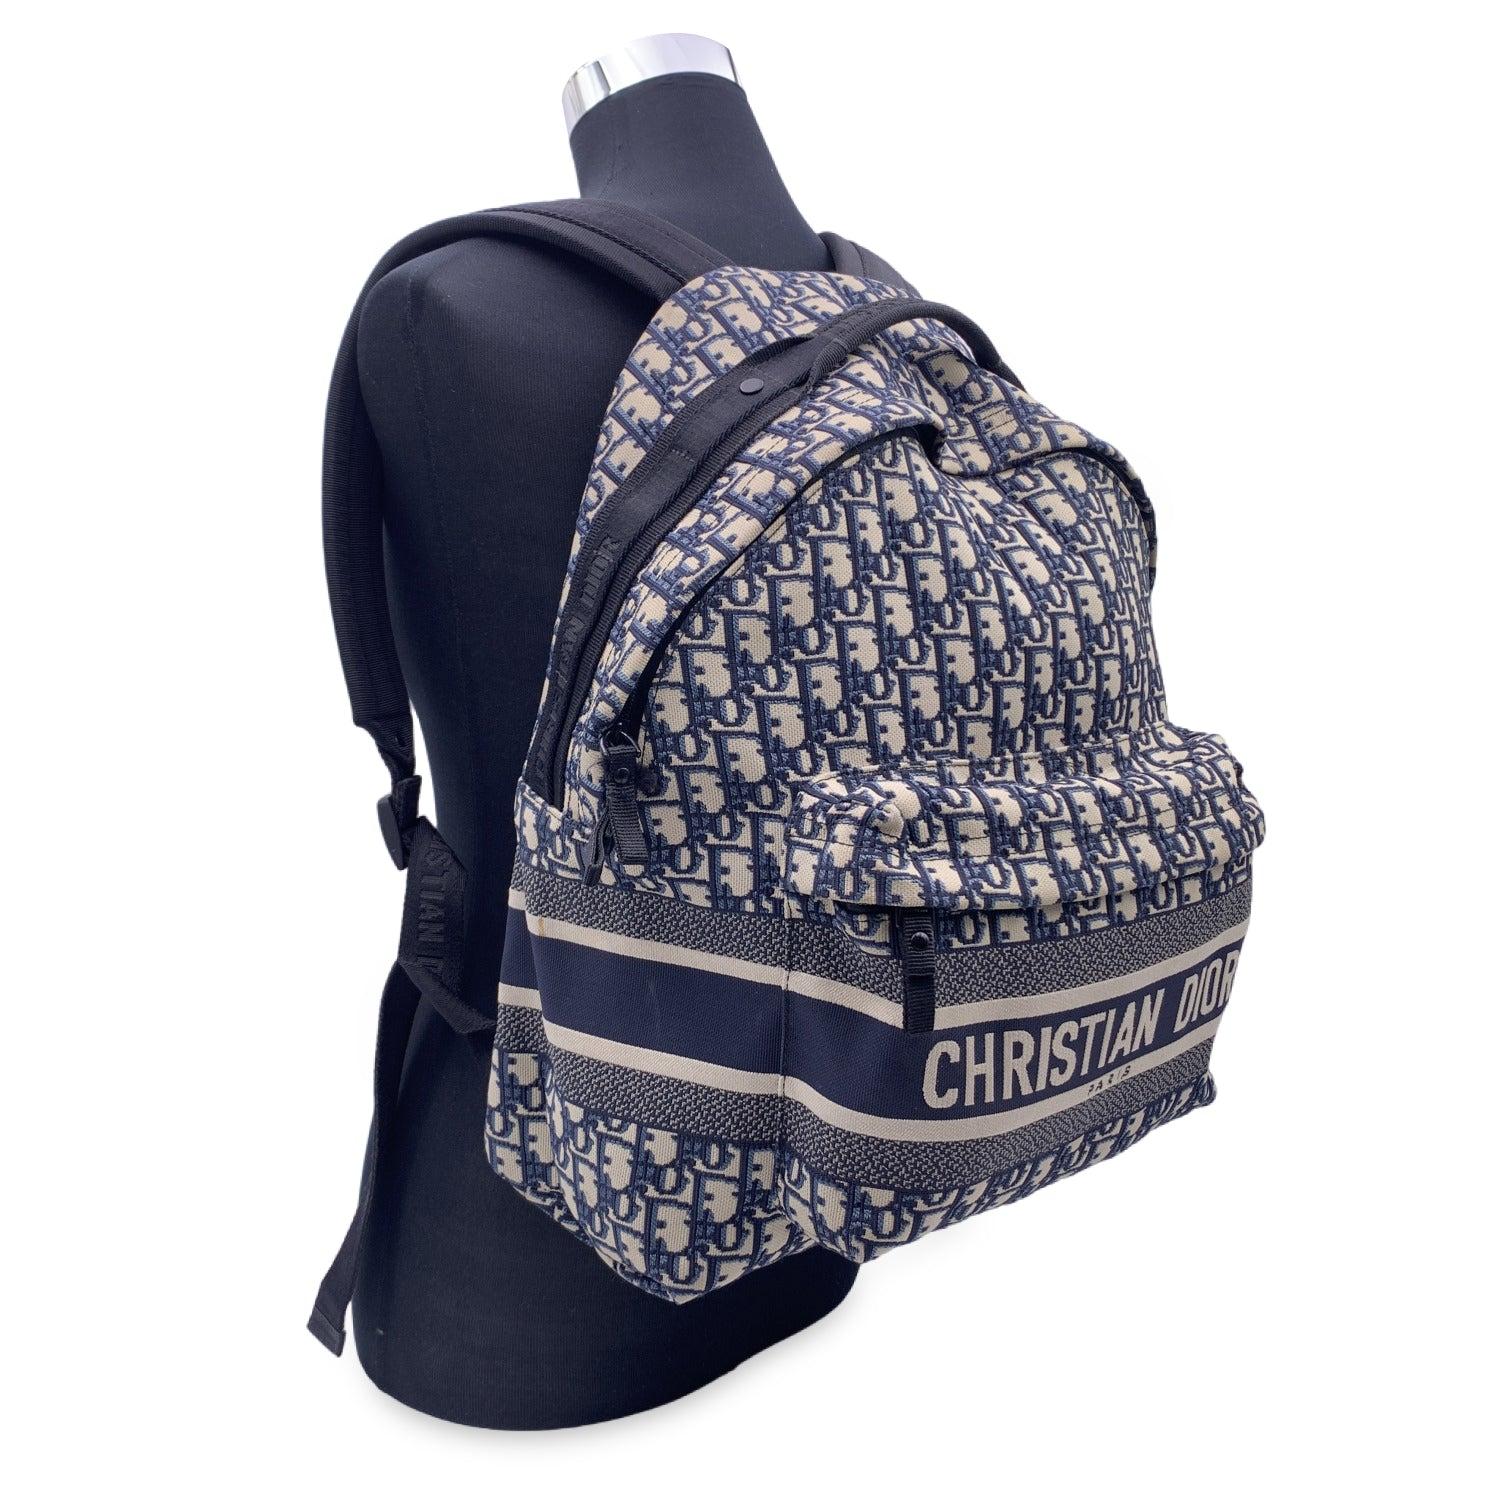 This beautiful Bag will come with a Certificate of Authenticity provided by Entrupy. The certificate will be provided at no further cost

Beautiful DiorTravel backpack crafted in blue waterproof Dior Oblique technical jacquard. 'CHRISTIAN DIOR